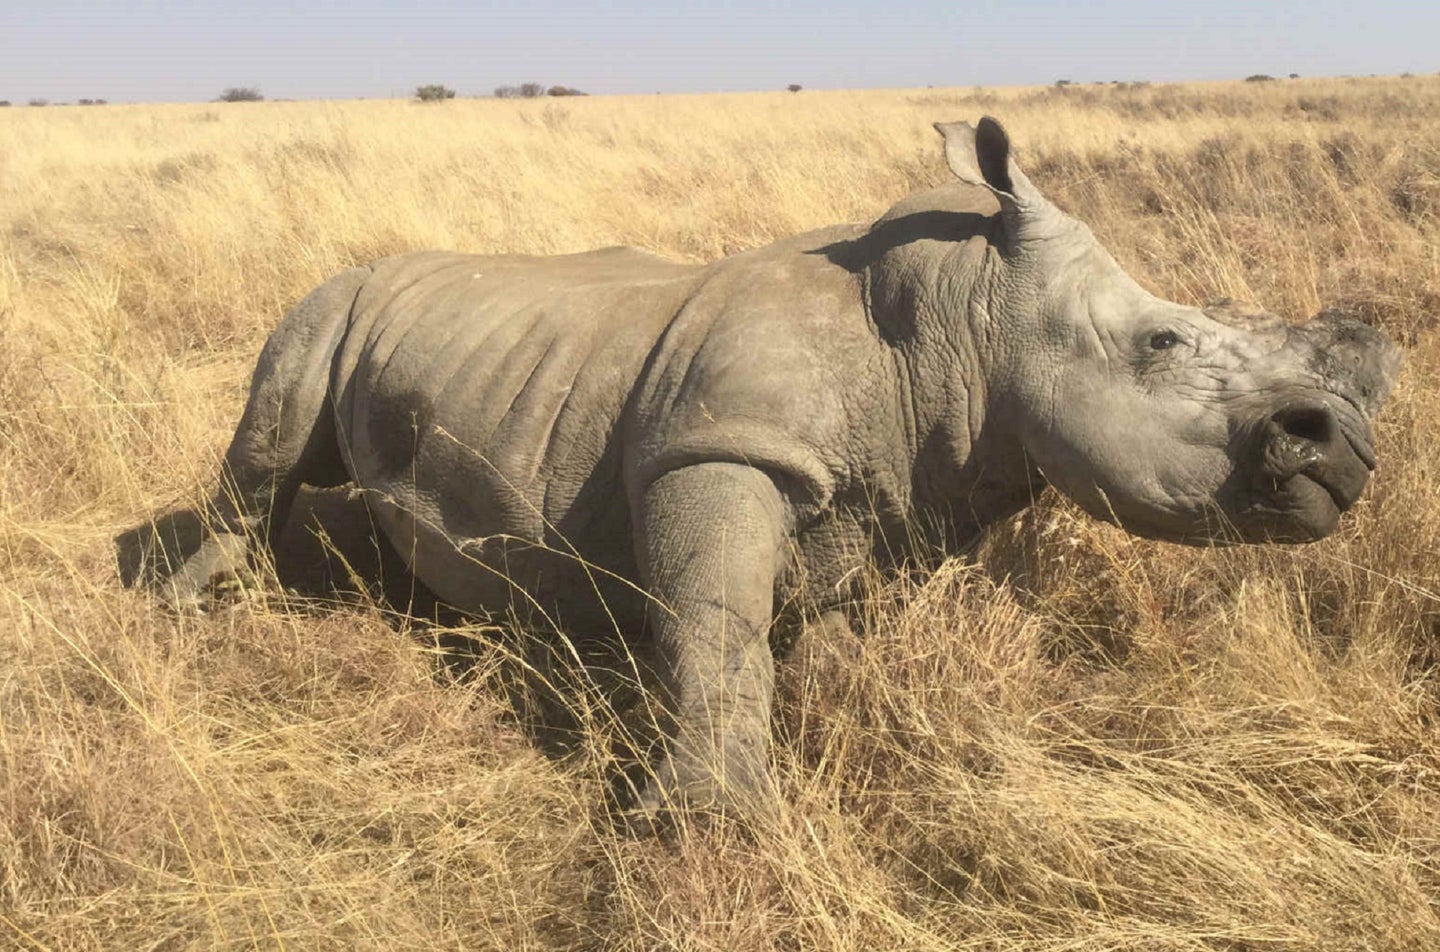 Dehorned adult white rhino in the grasses of John Hume's captive breeding ranch in South Africa